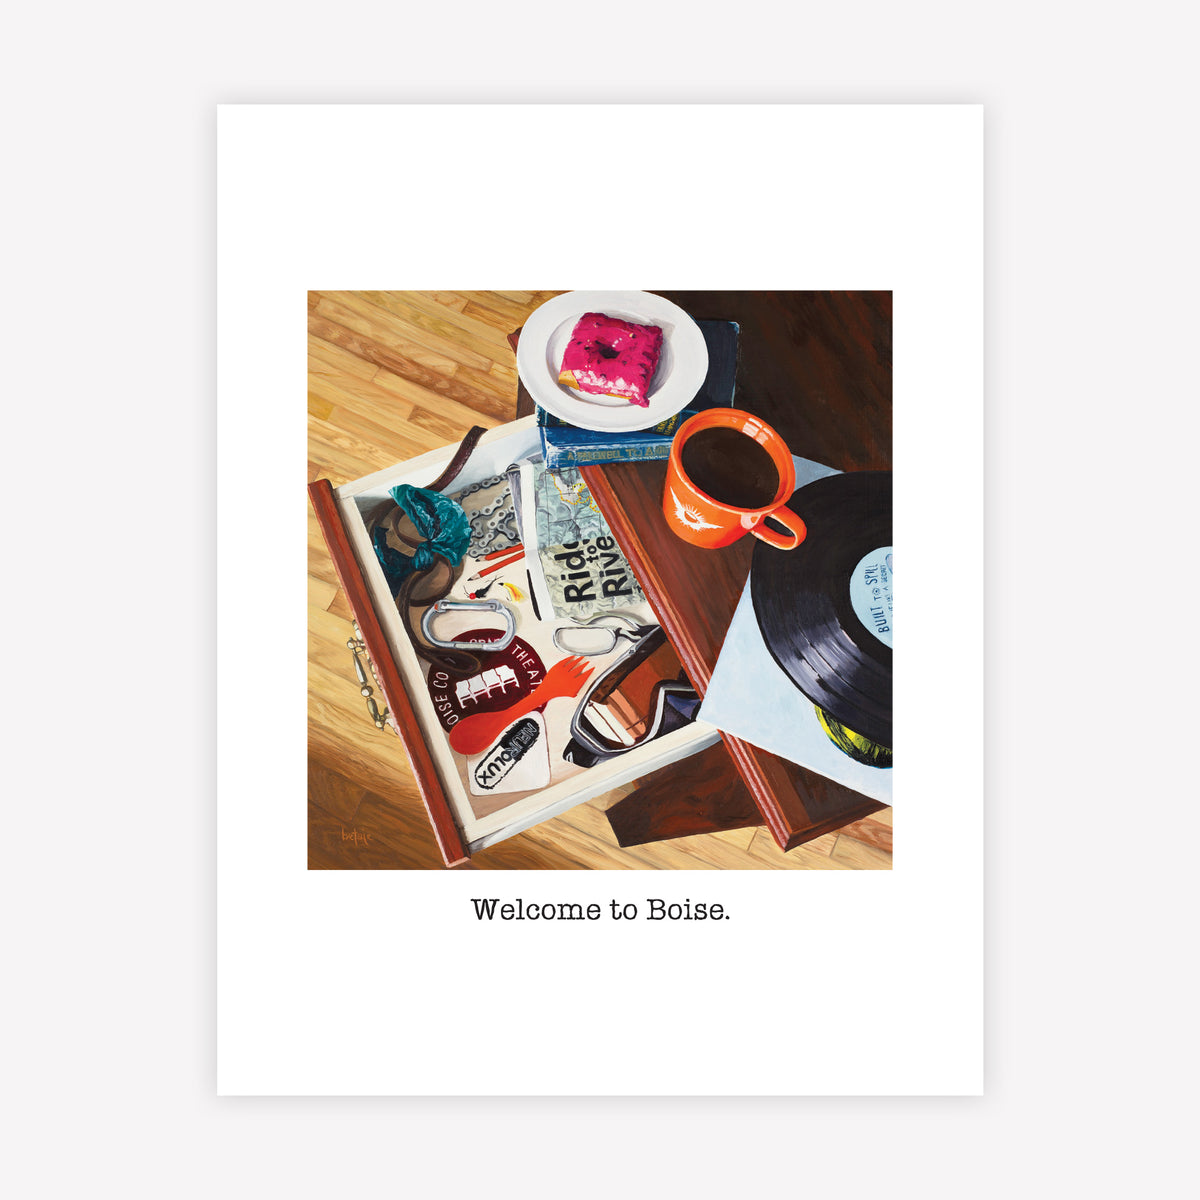 "Welcome to Boise" Greeting Card